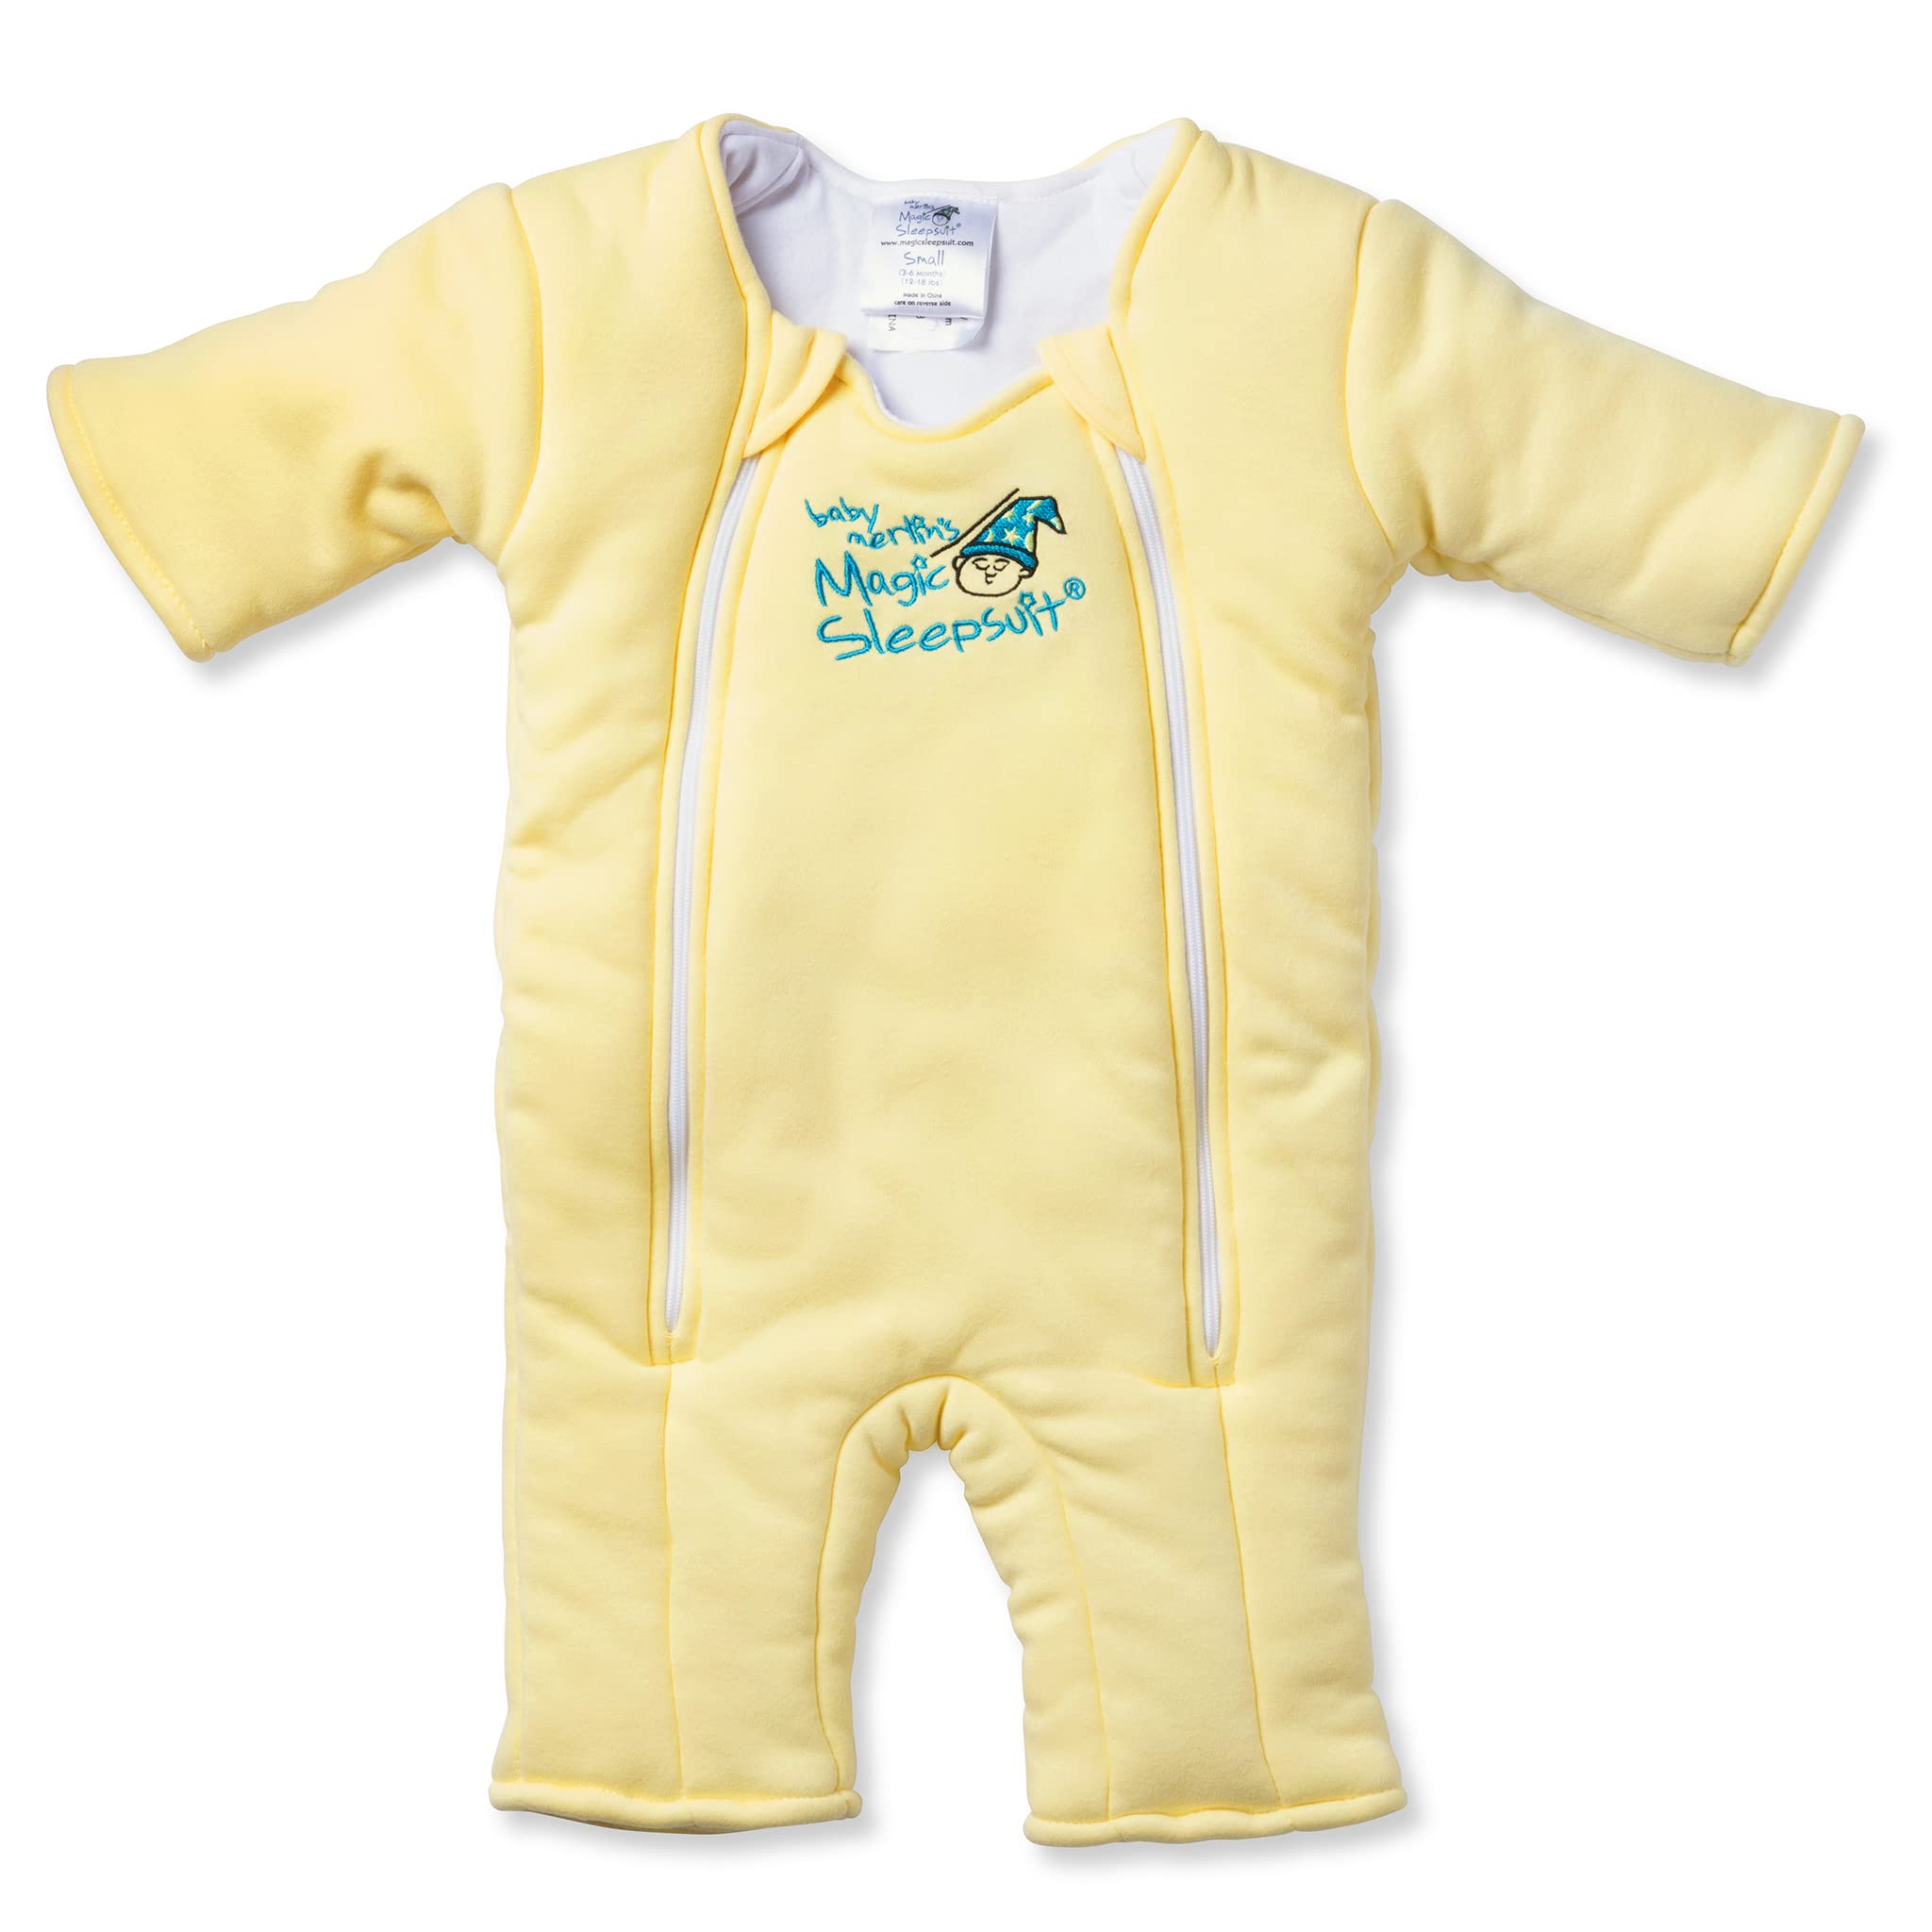 Baby Merlin's Magic Sleepsuit - 100% Cotton Baby Transition Swaddle - Baby Sleep Suit - Yellow - 3-6 Months